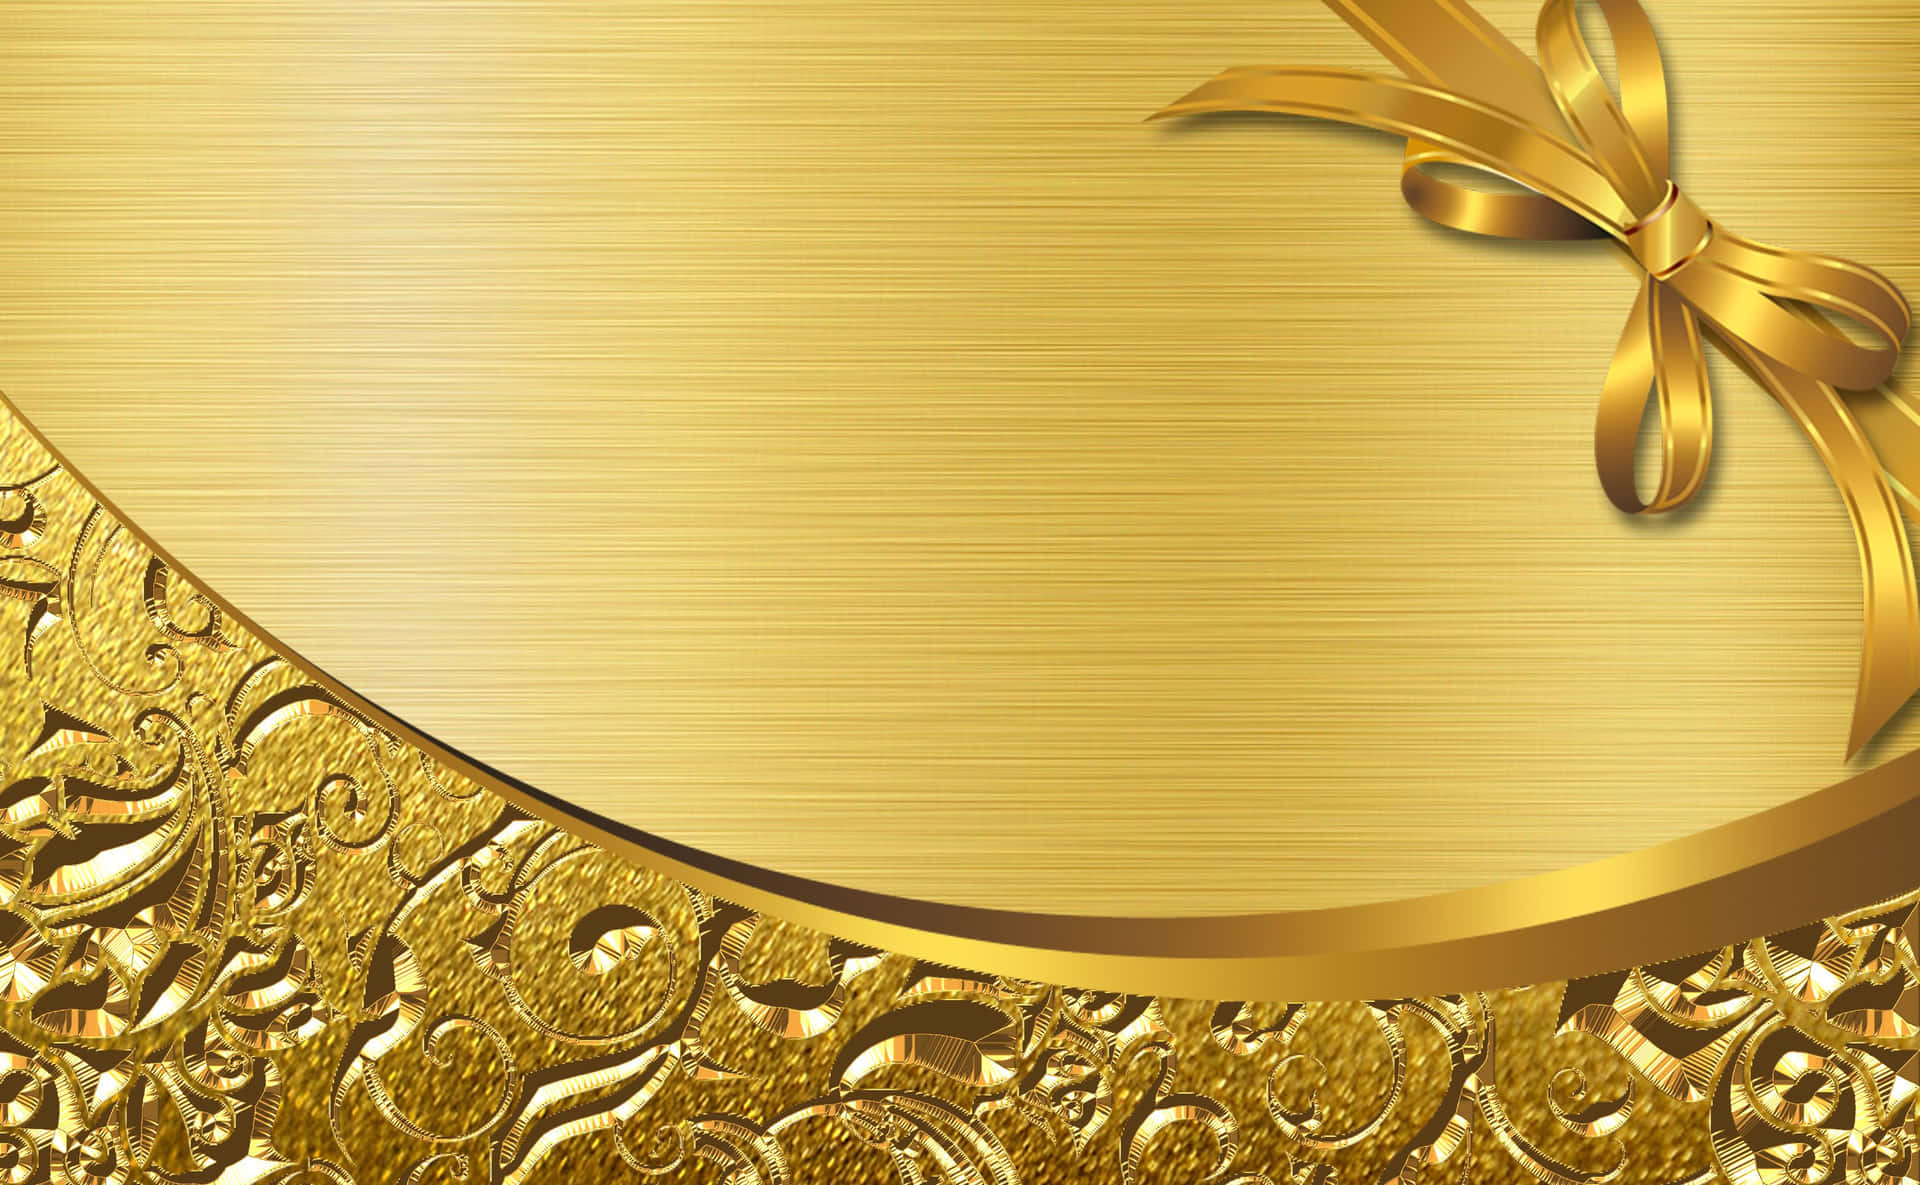 Gold Background With A Bow And Ribbon